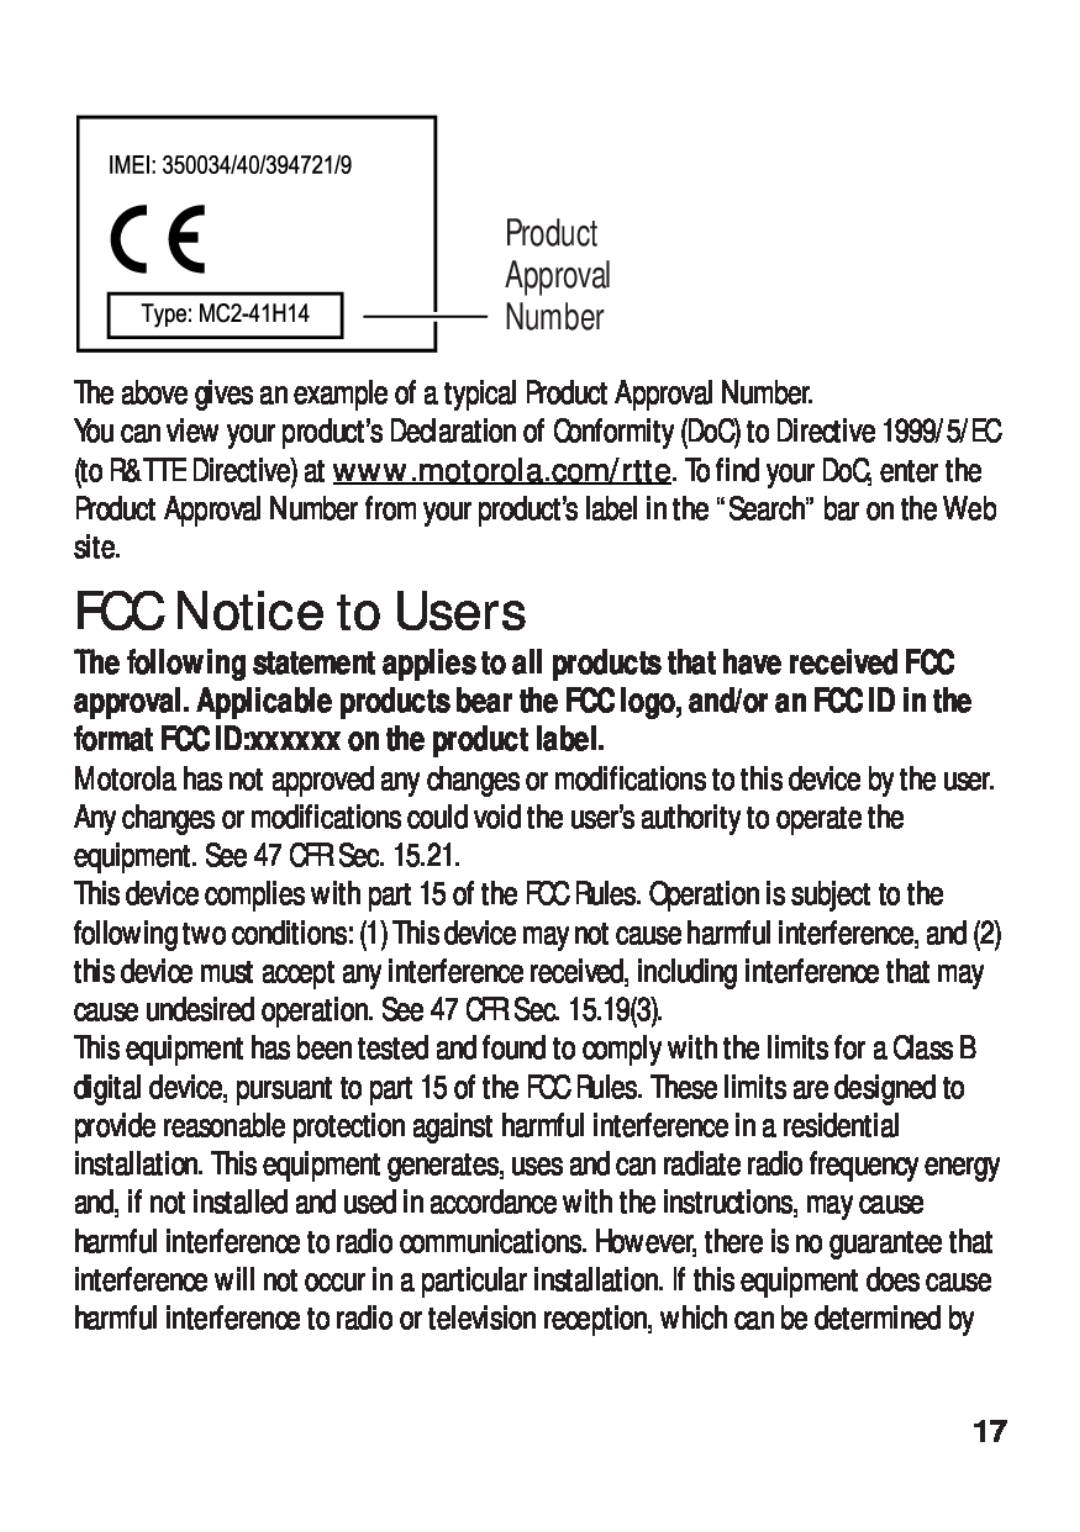 Motorola TX500 manual FCC Notice to Users, Product Approval Number 